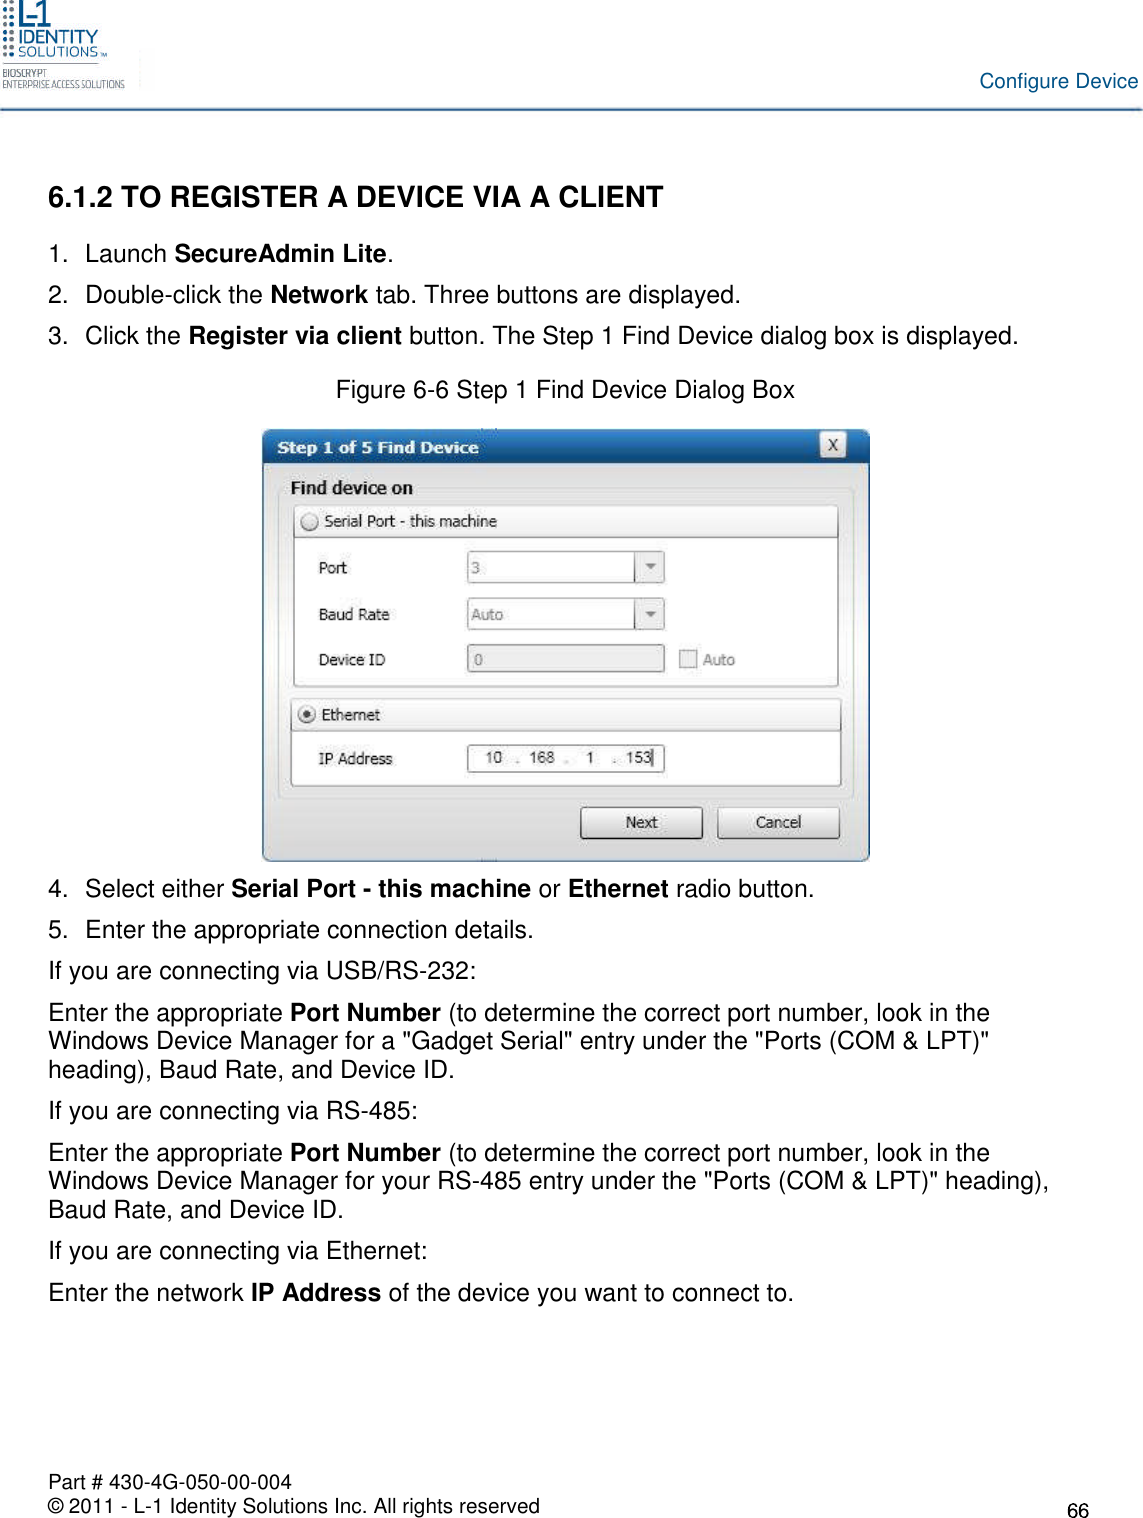 Part # 430-4G-050-00-004© 2011 - L-1 Identity Solutions Inc. All rights reservedConfigure Device6.1.2 TO REGISTER A DEVICE VIA A CLIENT1. Launch SecureAdmin Lite.2. Double-click the Network tab. Three buttons are displayed.3. Click the Register via client button. The Step 1 Find Device dialog box is displayed.Figure 6-6 Step 1 Find Device Dialog Box4. Select either Serial Port - this machine or Ethernet radio button.5. Enter the appropriate connection details.If you are connecting via USB/RS-232:Enter the appropriate Port Number (to determine the correct port number, look in theWindows Device Manager for a &quot;Gadget Serial&quot; entry under the &quot;Ports (COM &amp; LPT)&quot;heading), Baud Rate, and Device ID.If you are connecting via RS-485:Enter the appropriate Port Number (to determine the correct port number, look in theWindows Device Manager for your RS-485 entry under the &quot;Ports (COM &amp; LPT)&quot; heading),Baud Rate, and Device ID.If you are connecting via Ethernet:Enter the network IP Address of the device you want to connect to.